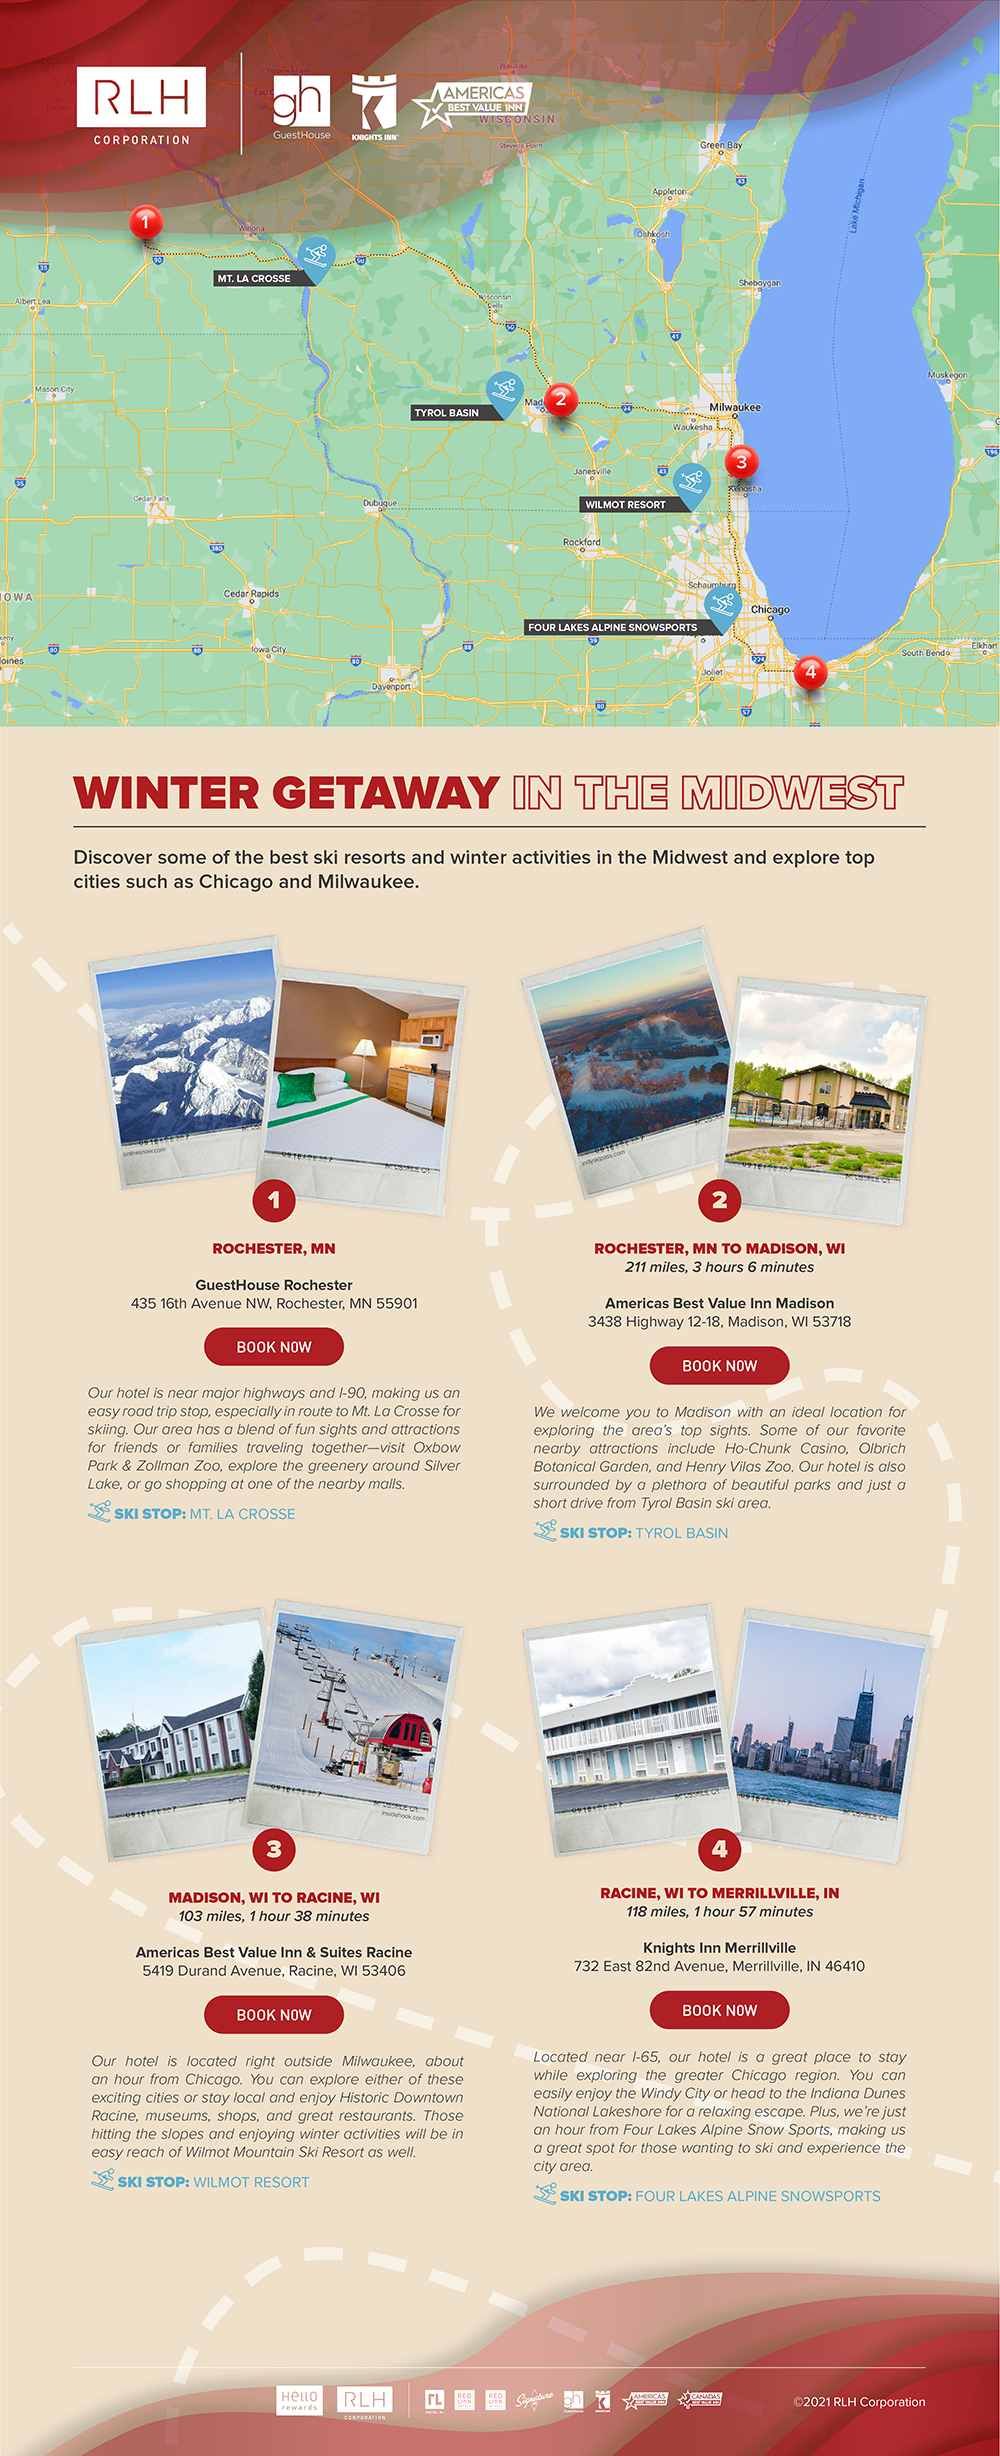 Winter Getaway in the Midwest Road Trip Map